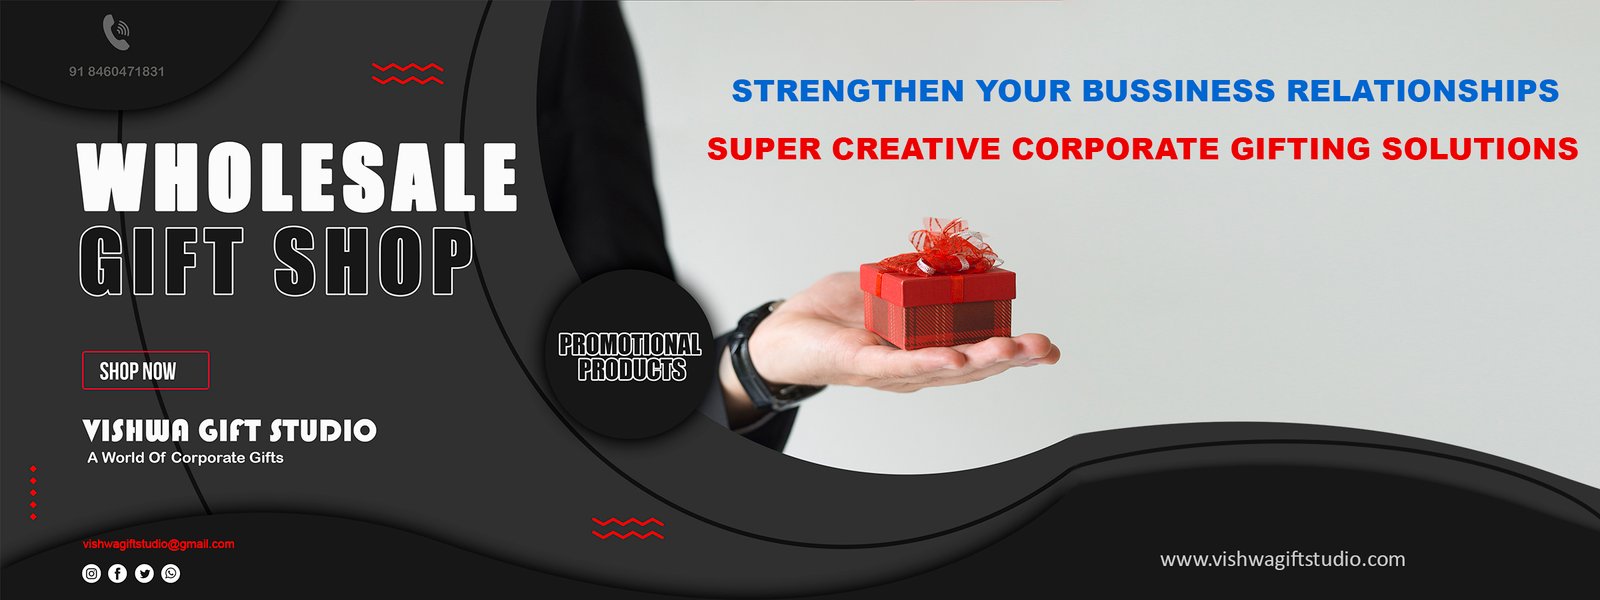 Top Corporate Gift Distributors in Pune - कॉर्पोरेट गिफ्ट डिस्ट्रीब्यूटर्स,  पुणे - Best Corporate Gifts Manufacturer - Justdial